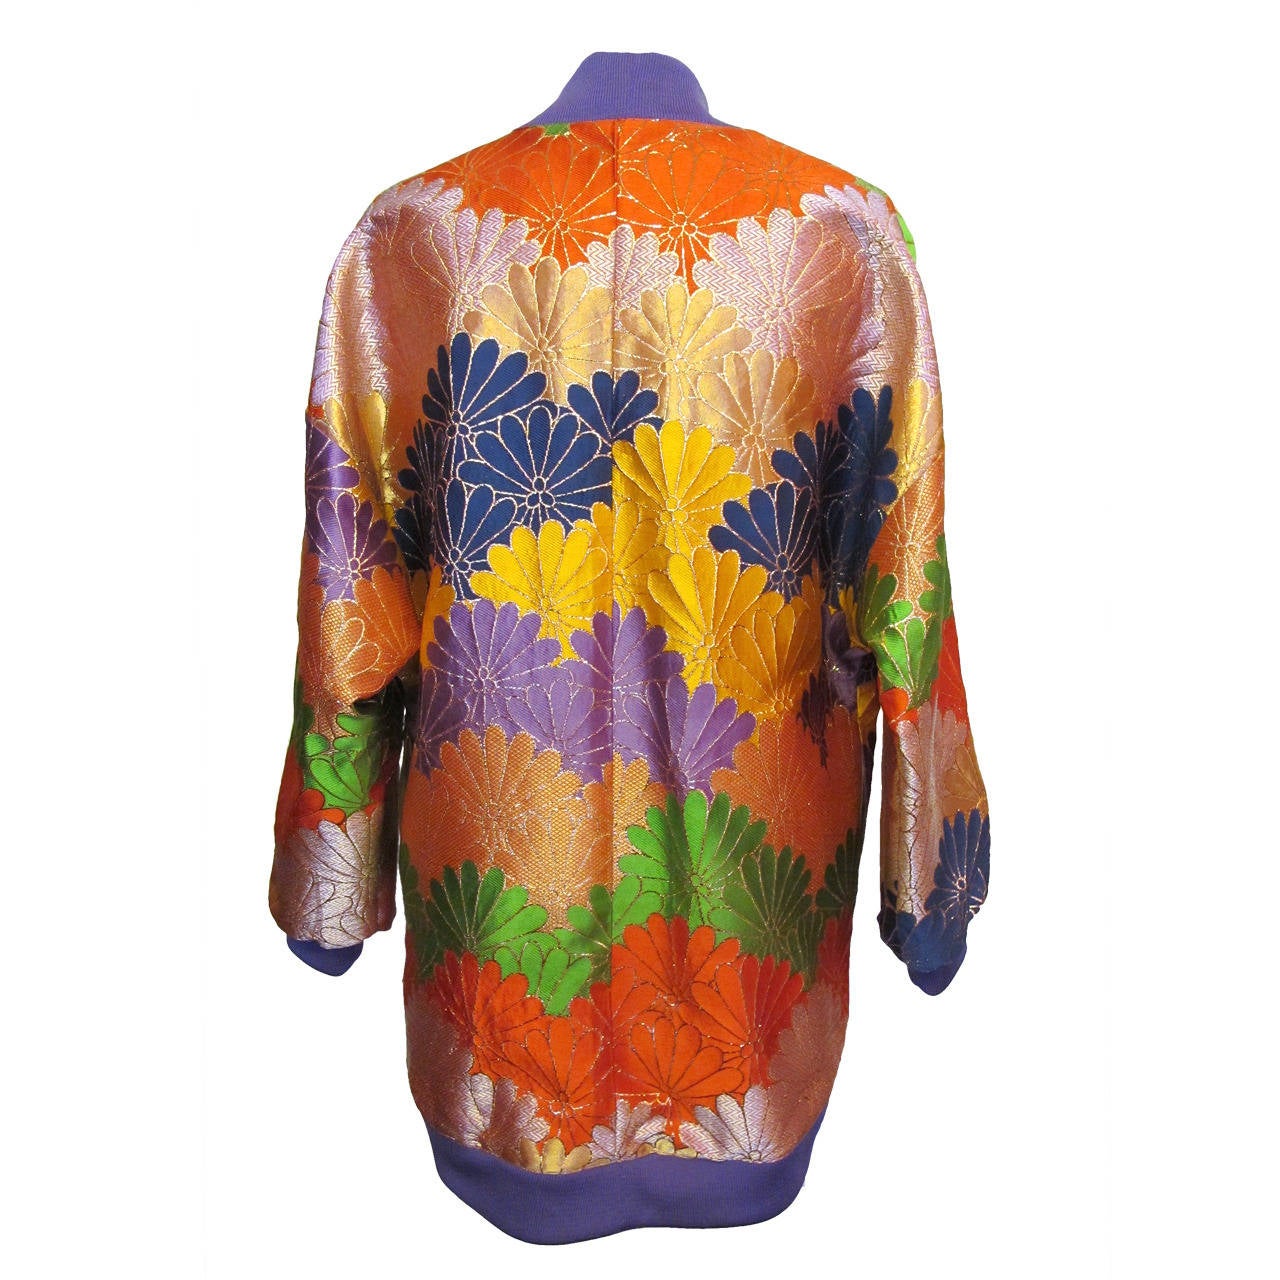 Fabulous drop shoulder silk faille jacket with Japanese inspired floral design in bold vibrant hues of lime green, mandarin orange, mustard yellow, eggplant purple and dark cerulean blue. Each flower bordered in gold metallic thread, the jacket